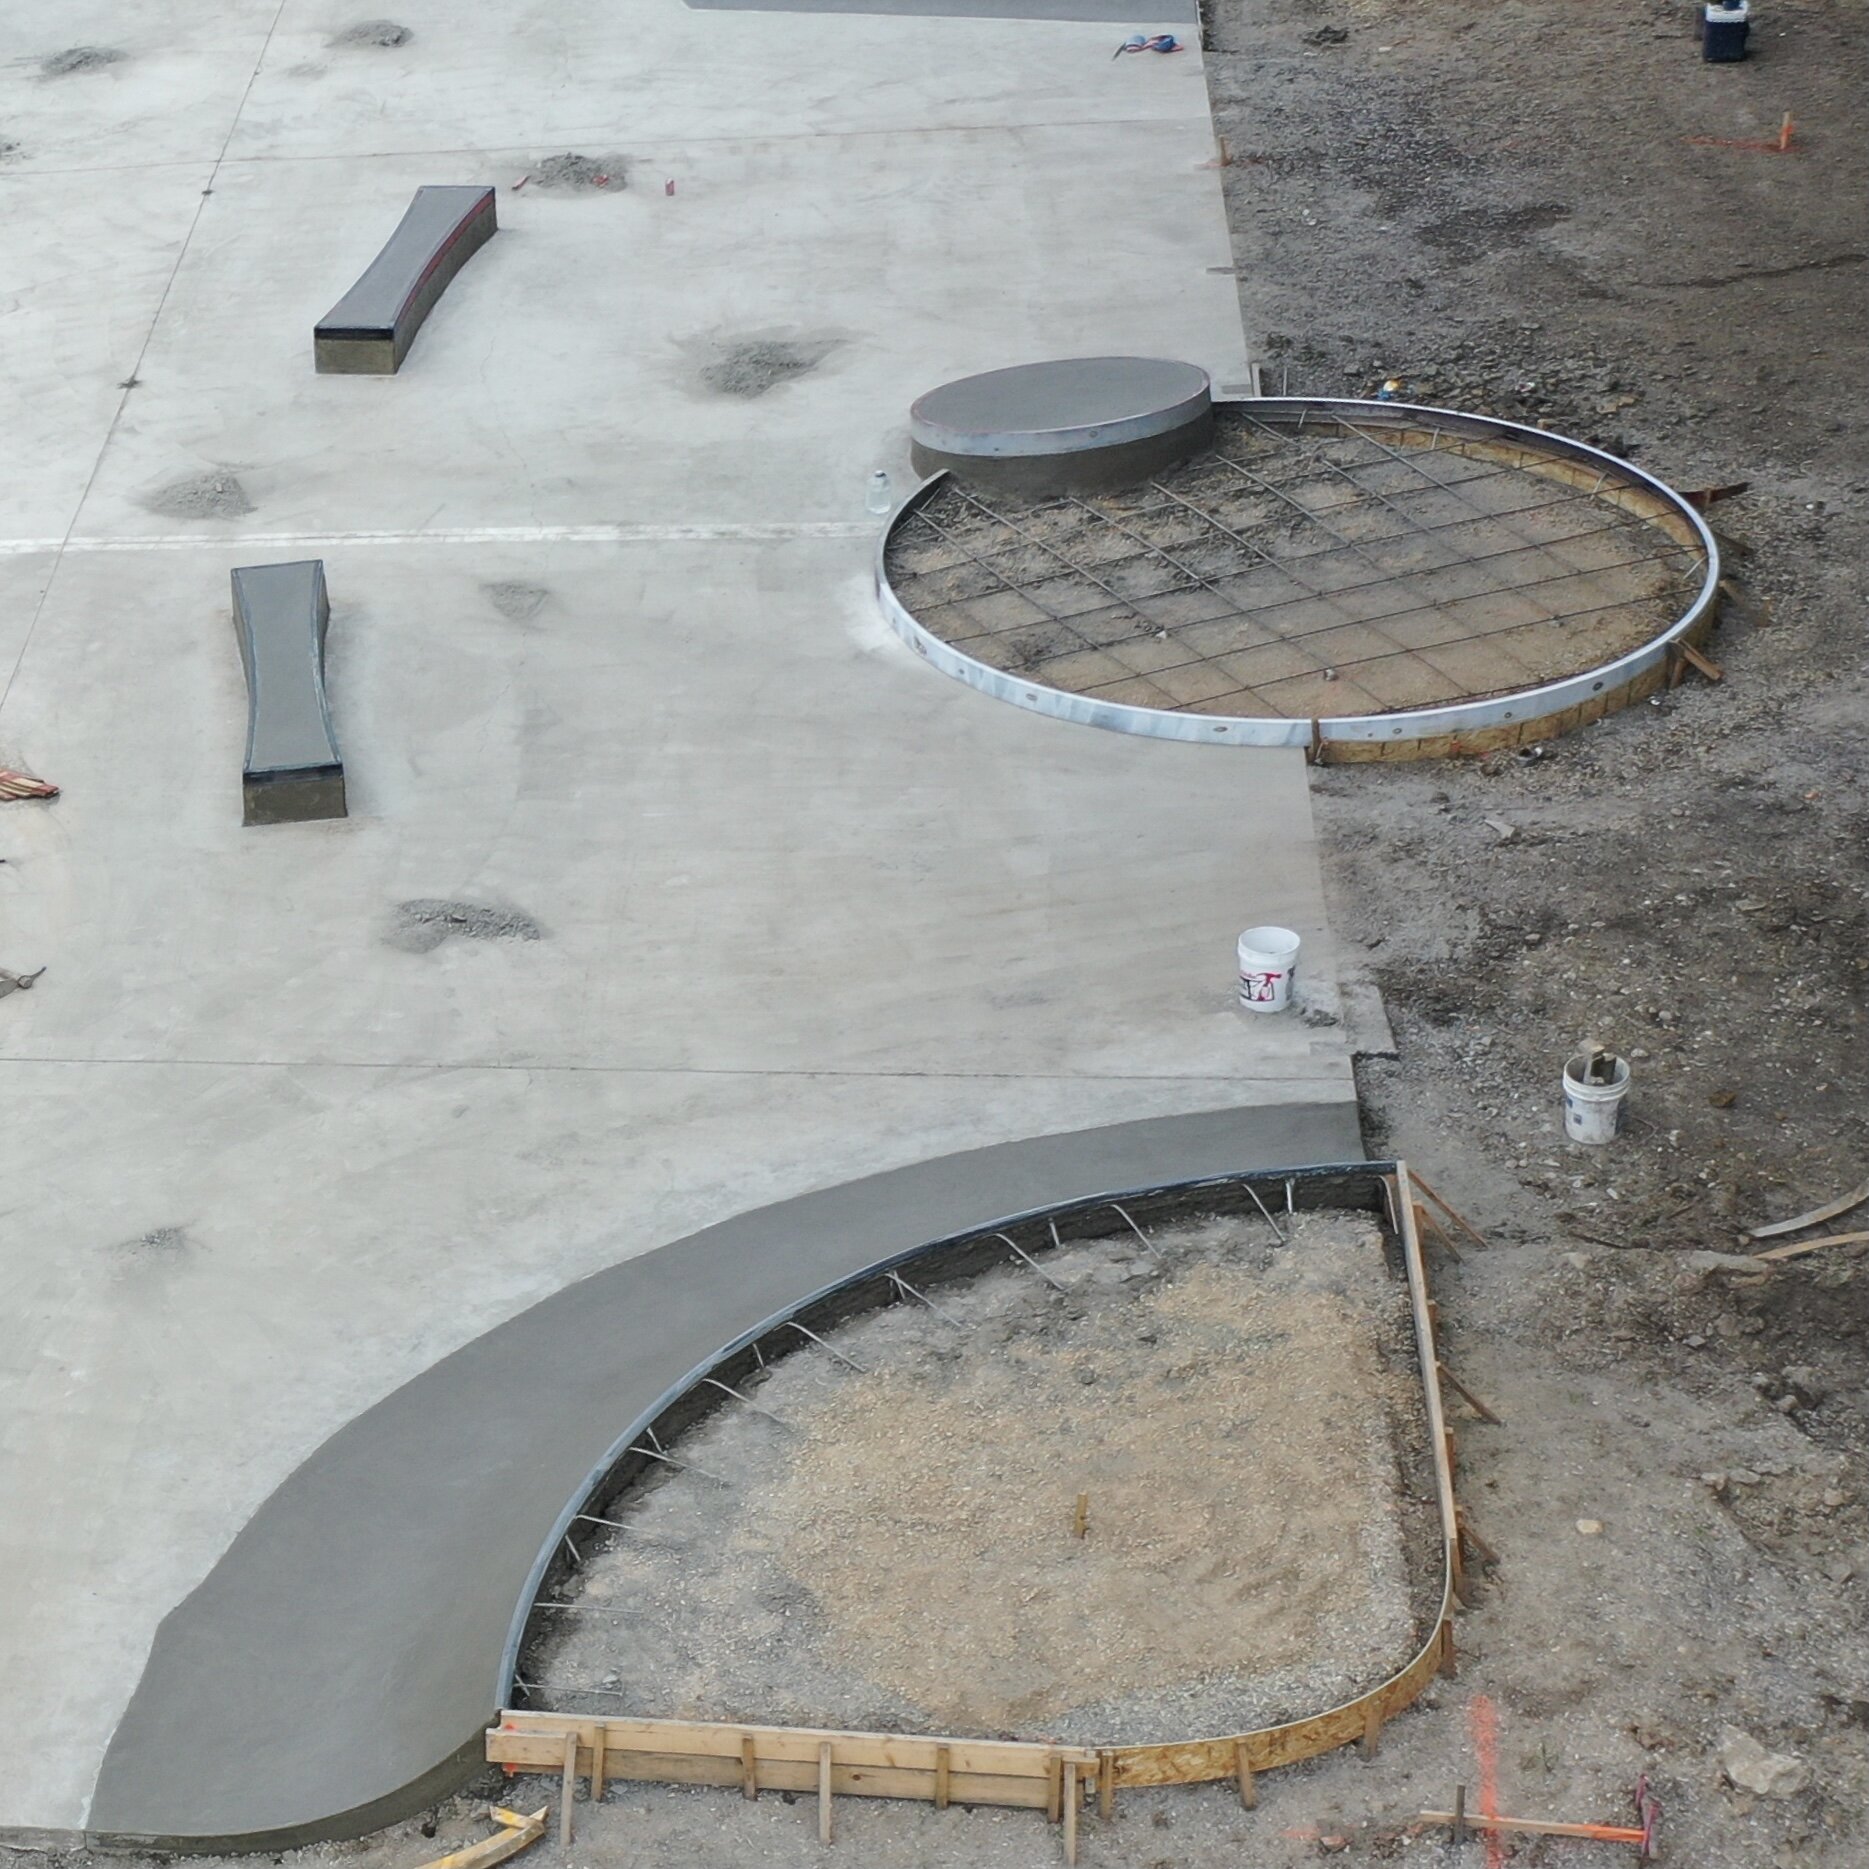 Another skatepark recycling project filled with fun shapes 💥 reusing an existing concrete slab to maximize square footage and budget in Oconomowoc, Wisconsin 😎